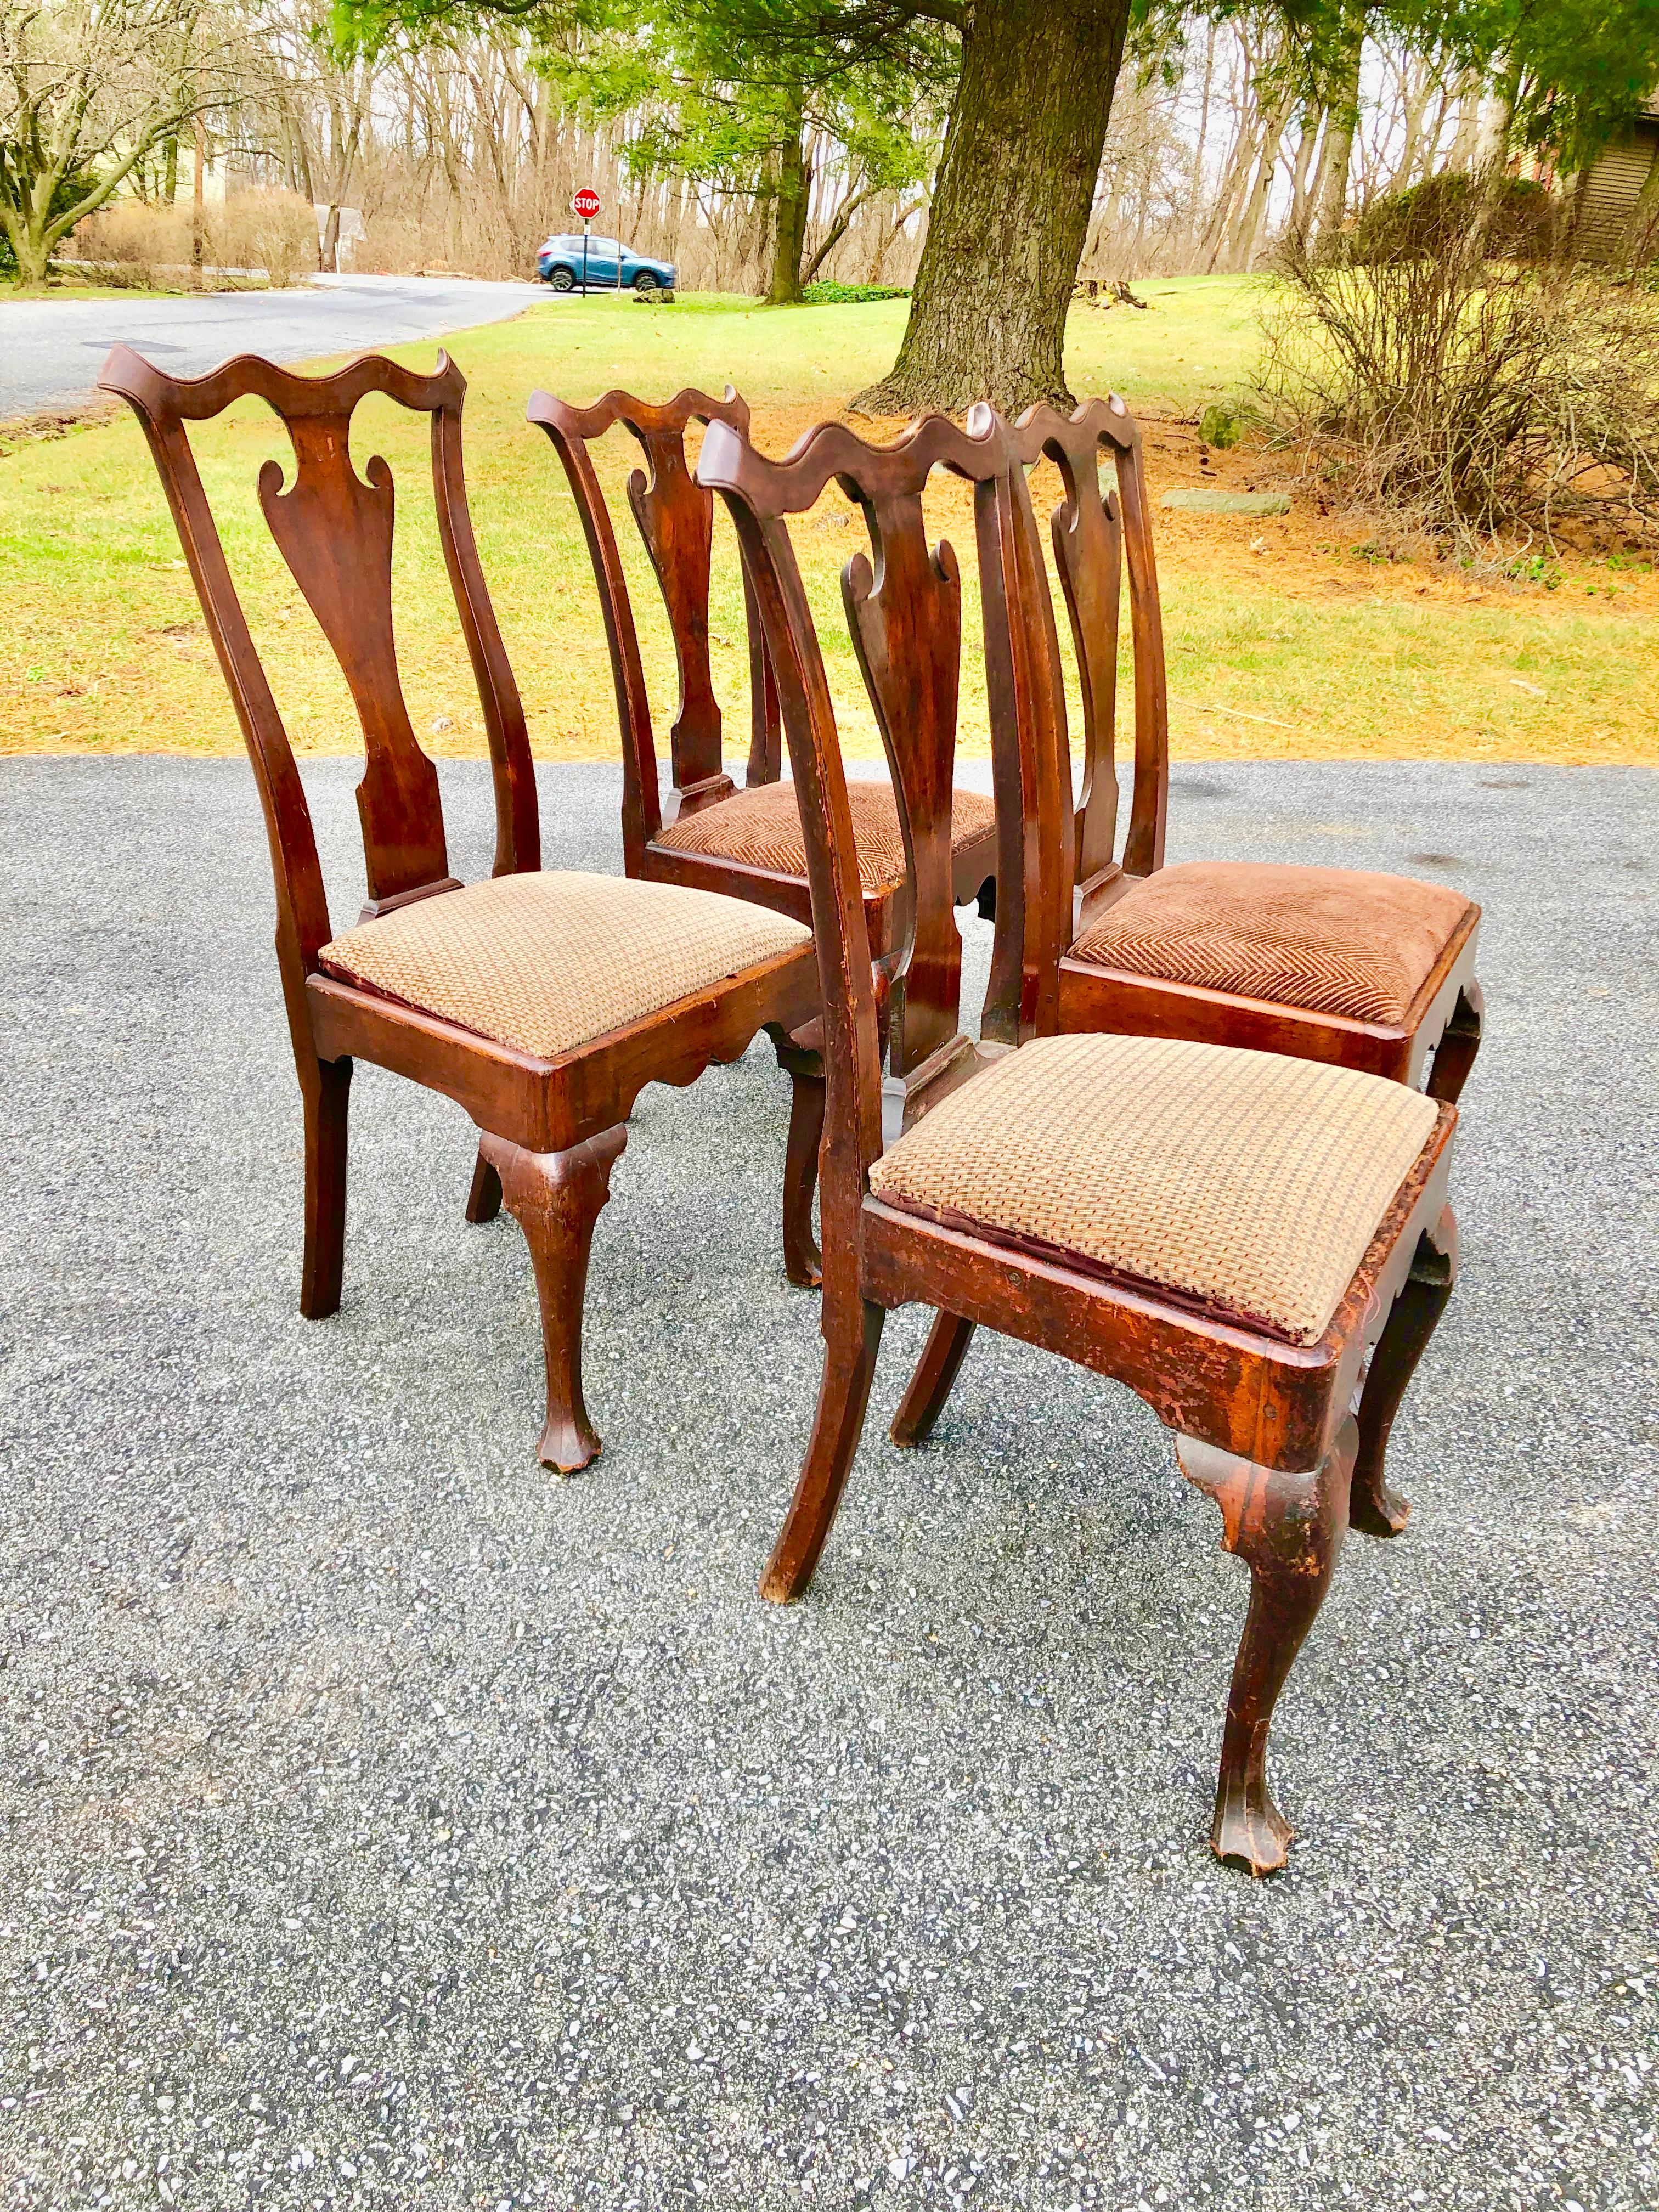 Queen Anne Philadelphia Queen Ann Chairs Walnut 18th Century Savery Type Set of Four For Sale